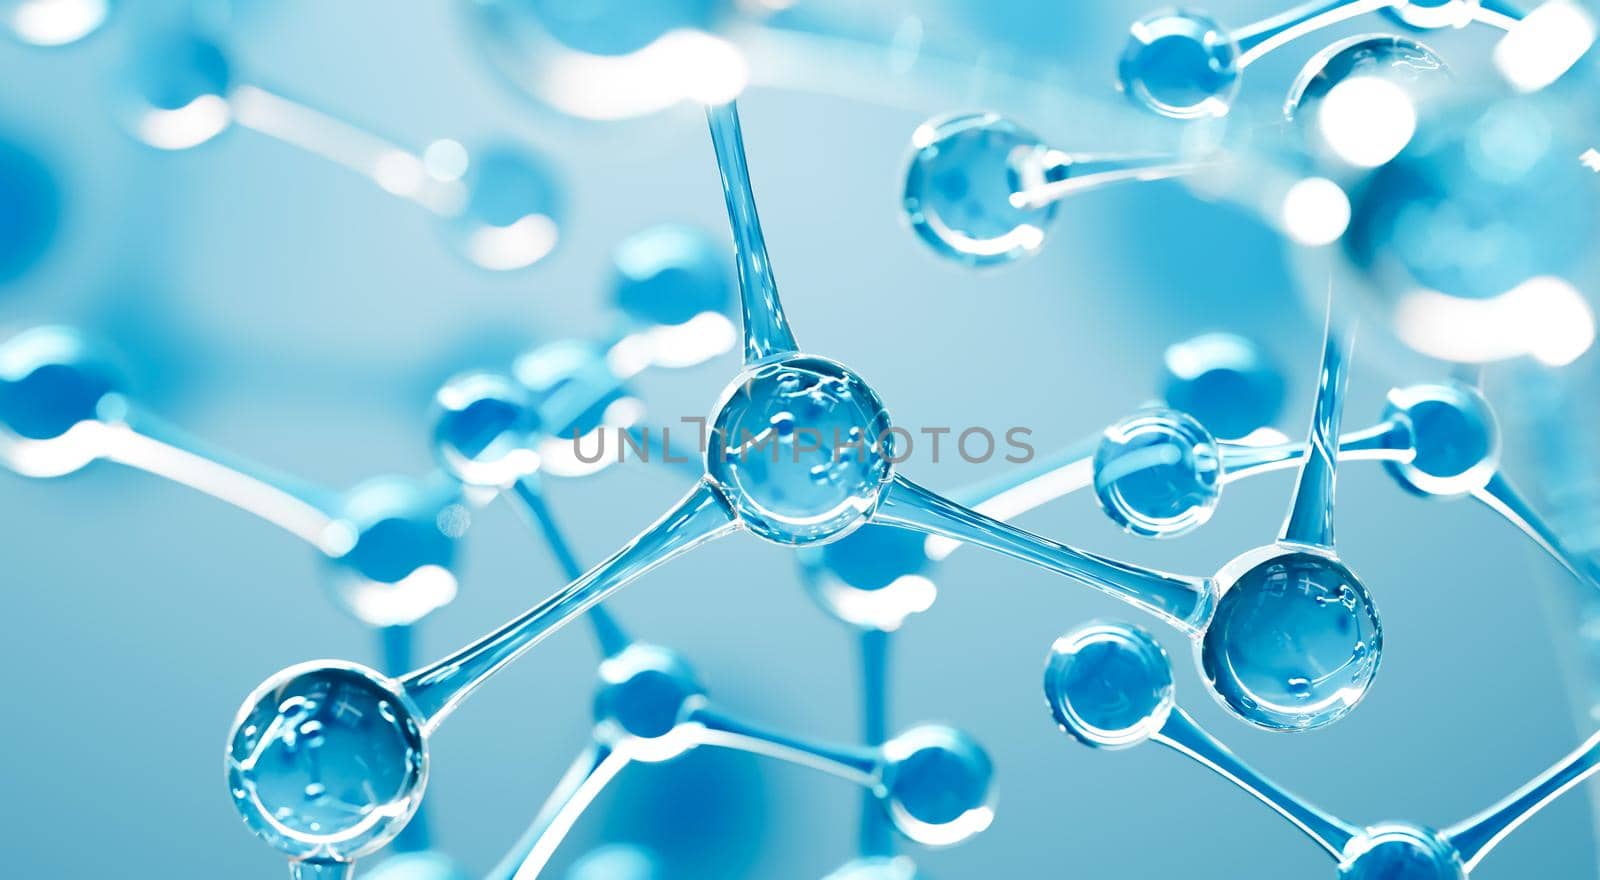 Abstract dna background for chemistry science banner or flyer. Abstract water molecules design. Atoms formula. Science or medical background. 3d rendering illustration